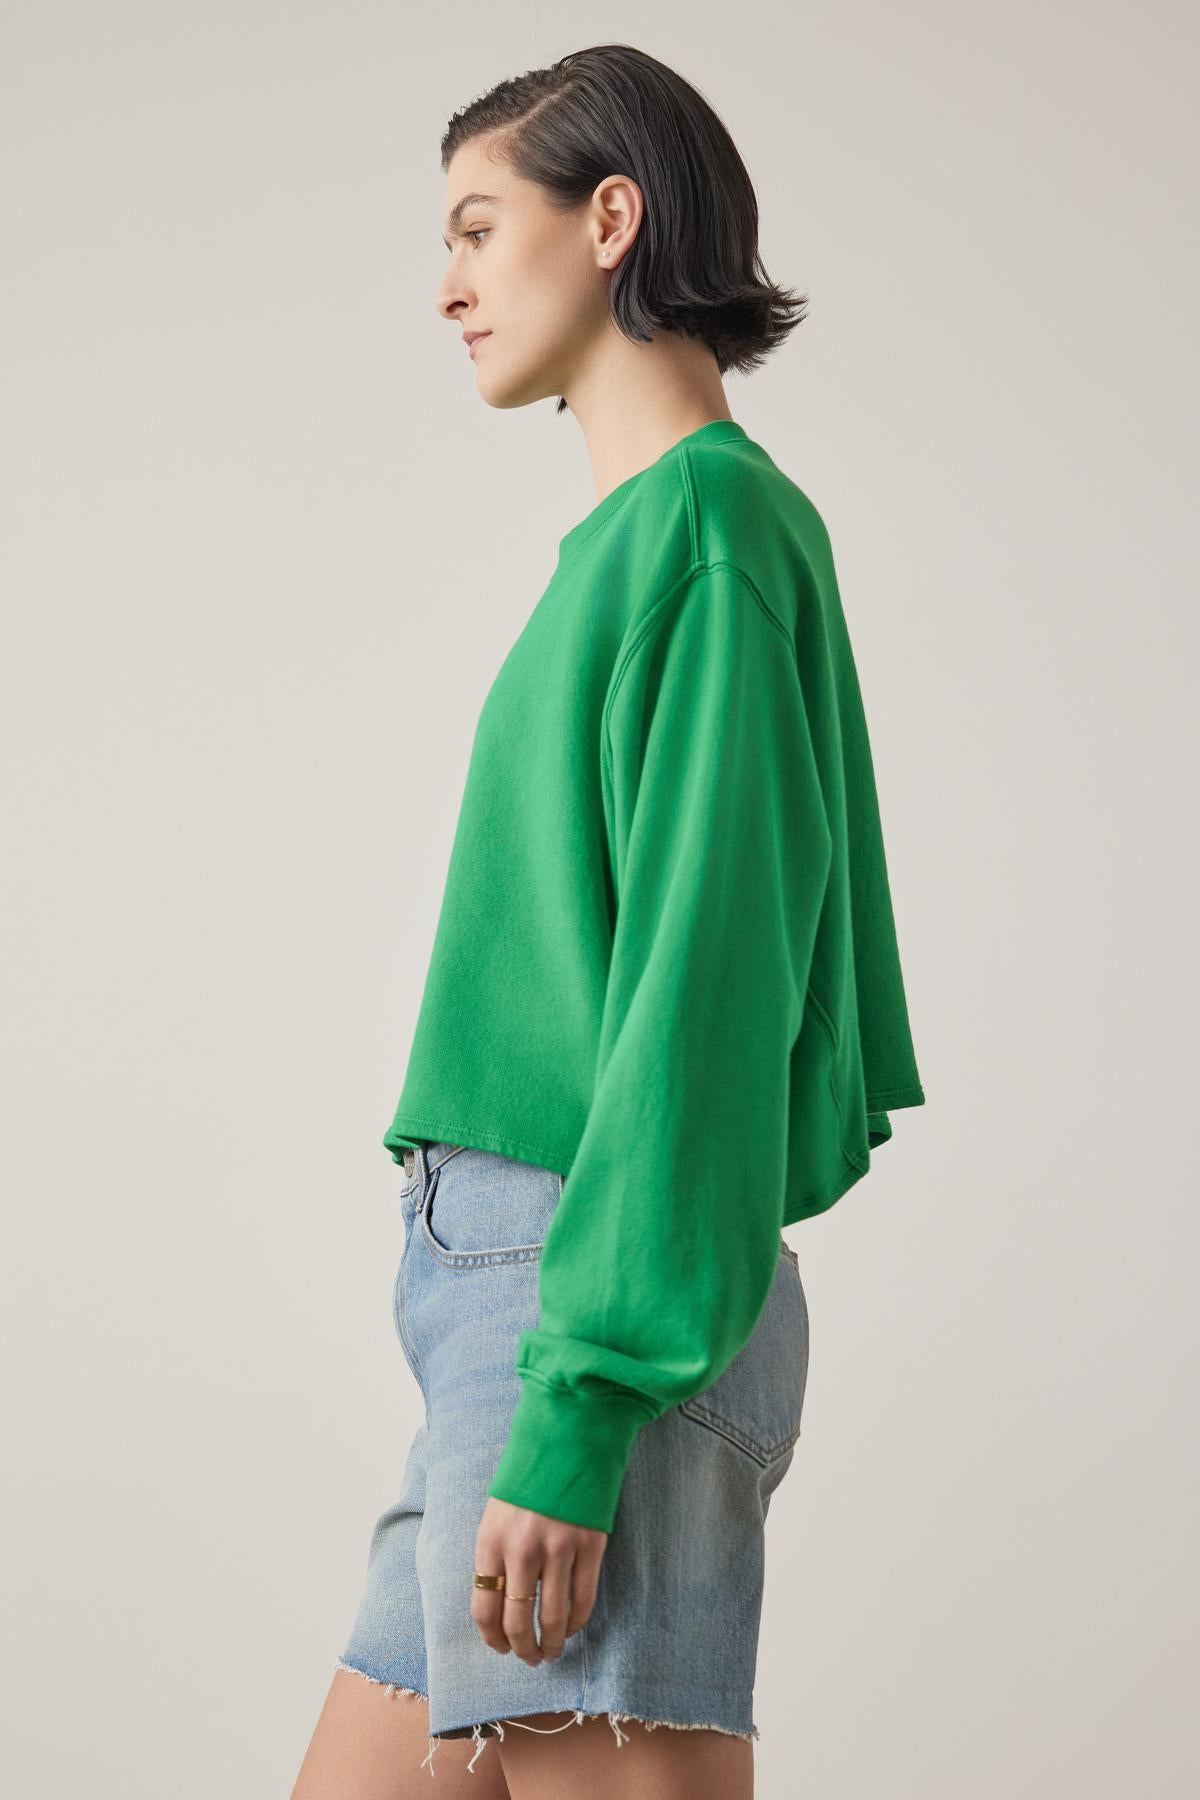 A young woman in a vibrant green Velvet by Jenny Graham Malibu sweatshirt and blue denim shorts stands in profile against a neutral background.-36863304564929